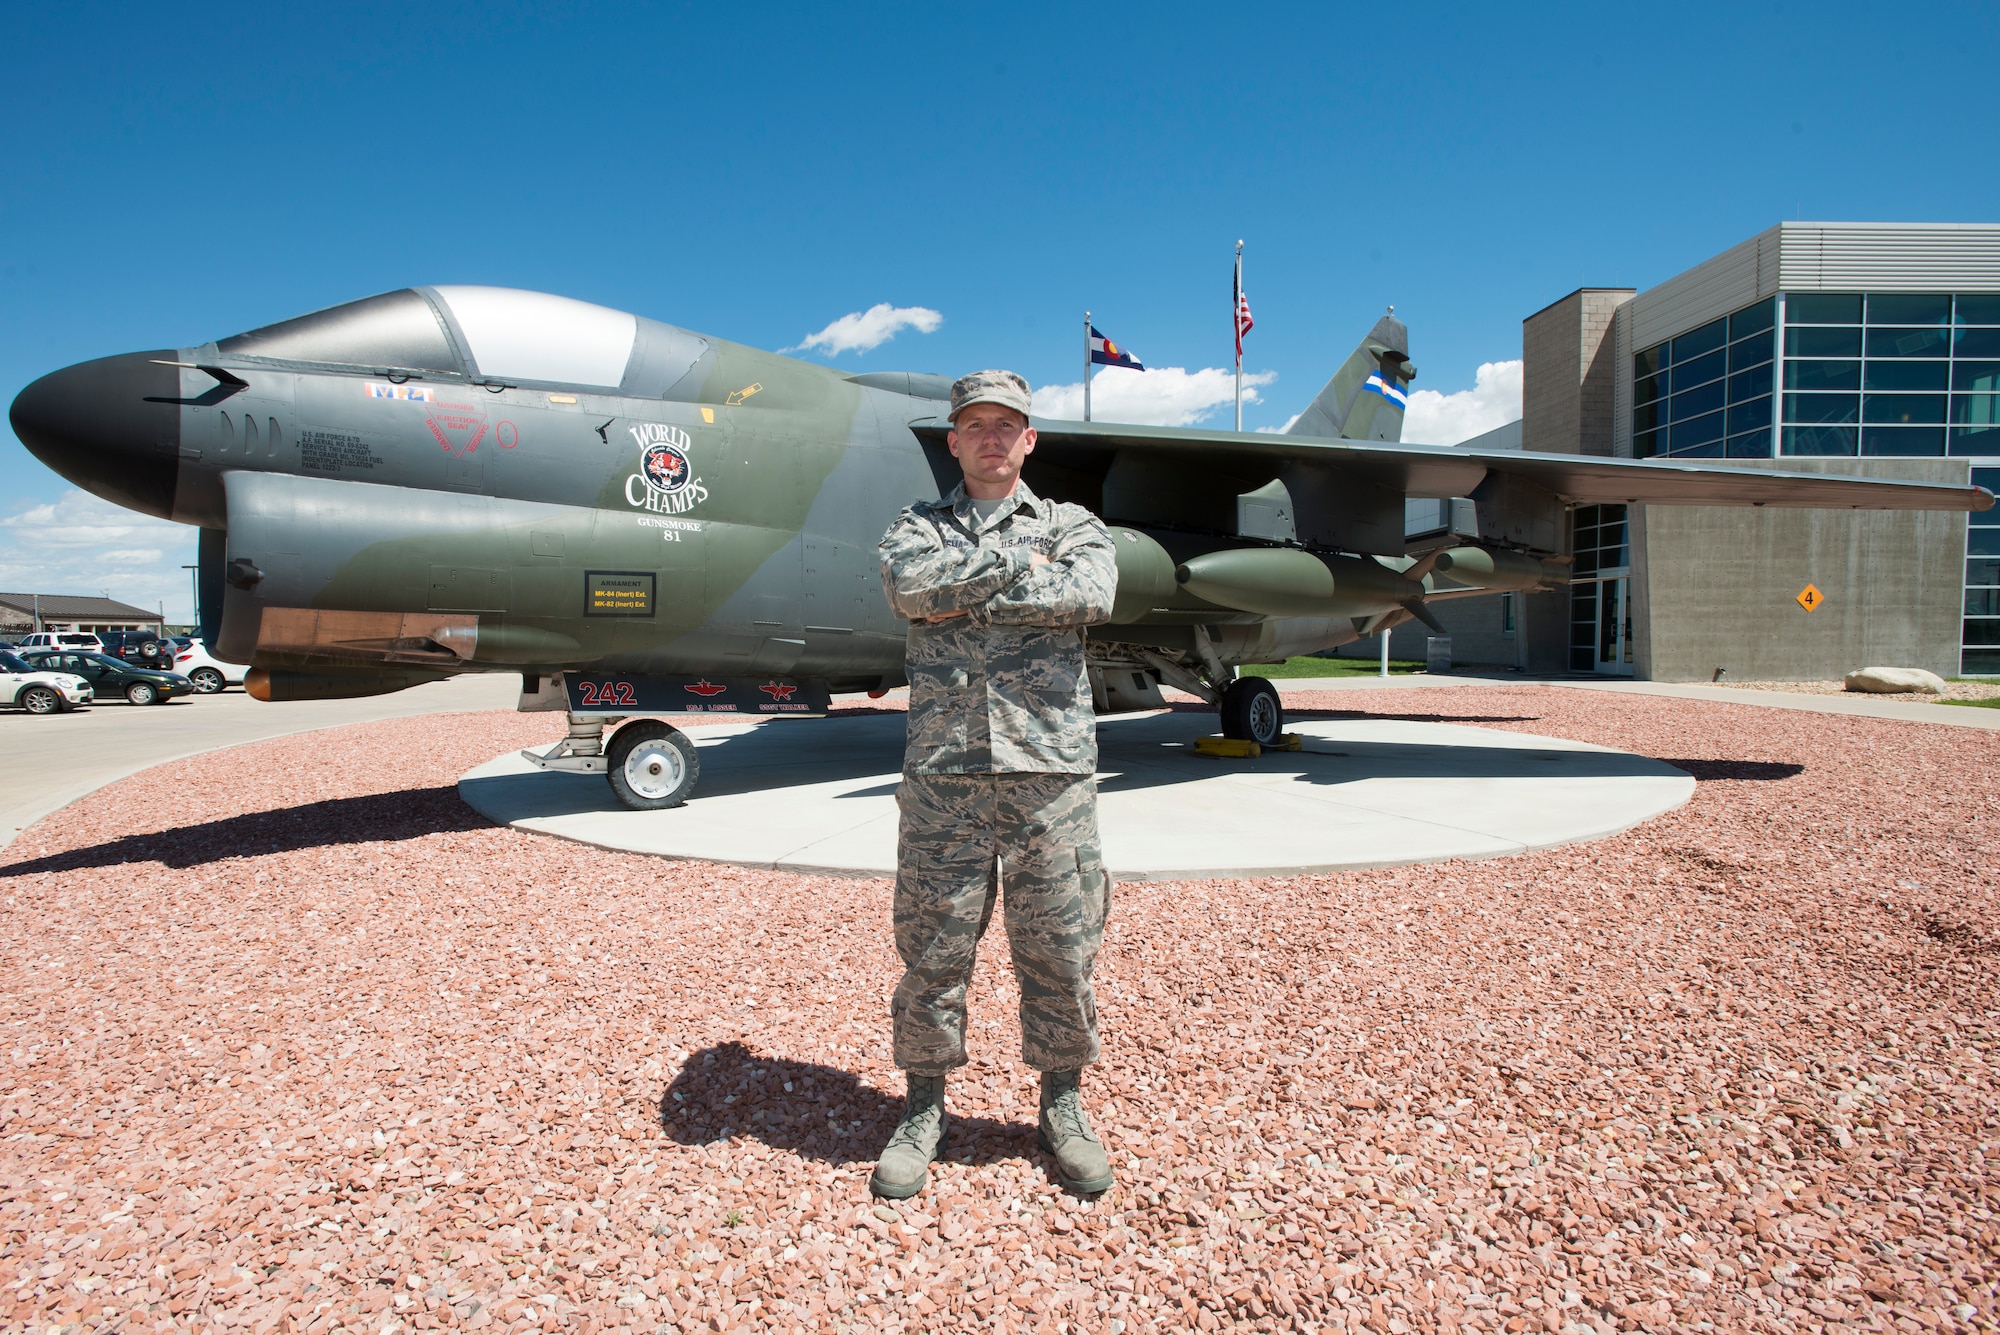 U.S. Air Force Senior Airman Jonathan R. Smail, a transmission technician from the 233rd Space Communications Squadron, Colorado Air National Guard, poses in front of a static display in front of the headquarters building at the Greeley Air National Guard Station, Greeley, Colo., June 7, 2015. Smail, who troubleshoots and maintains satellite communications electronic equipment for the 233rd's one-of-a-kind mobile nuclear and missile launch tracking mission, won the 2014 Air National Guardsman of the year. (Air National Guard photo by Tech. Sgt. Wolfram M. Stumpf)